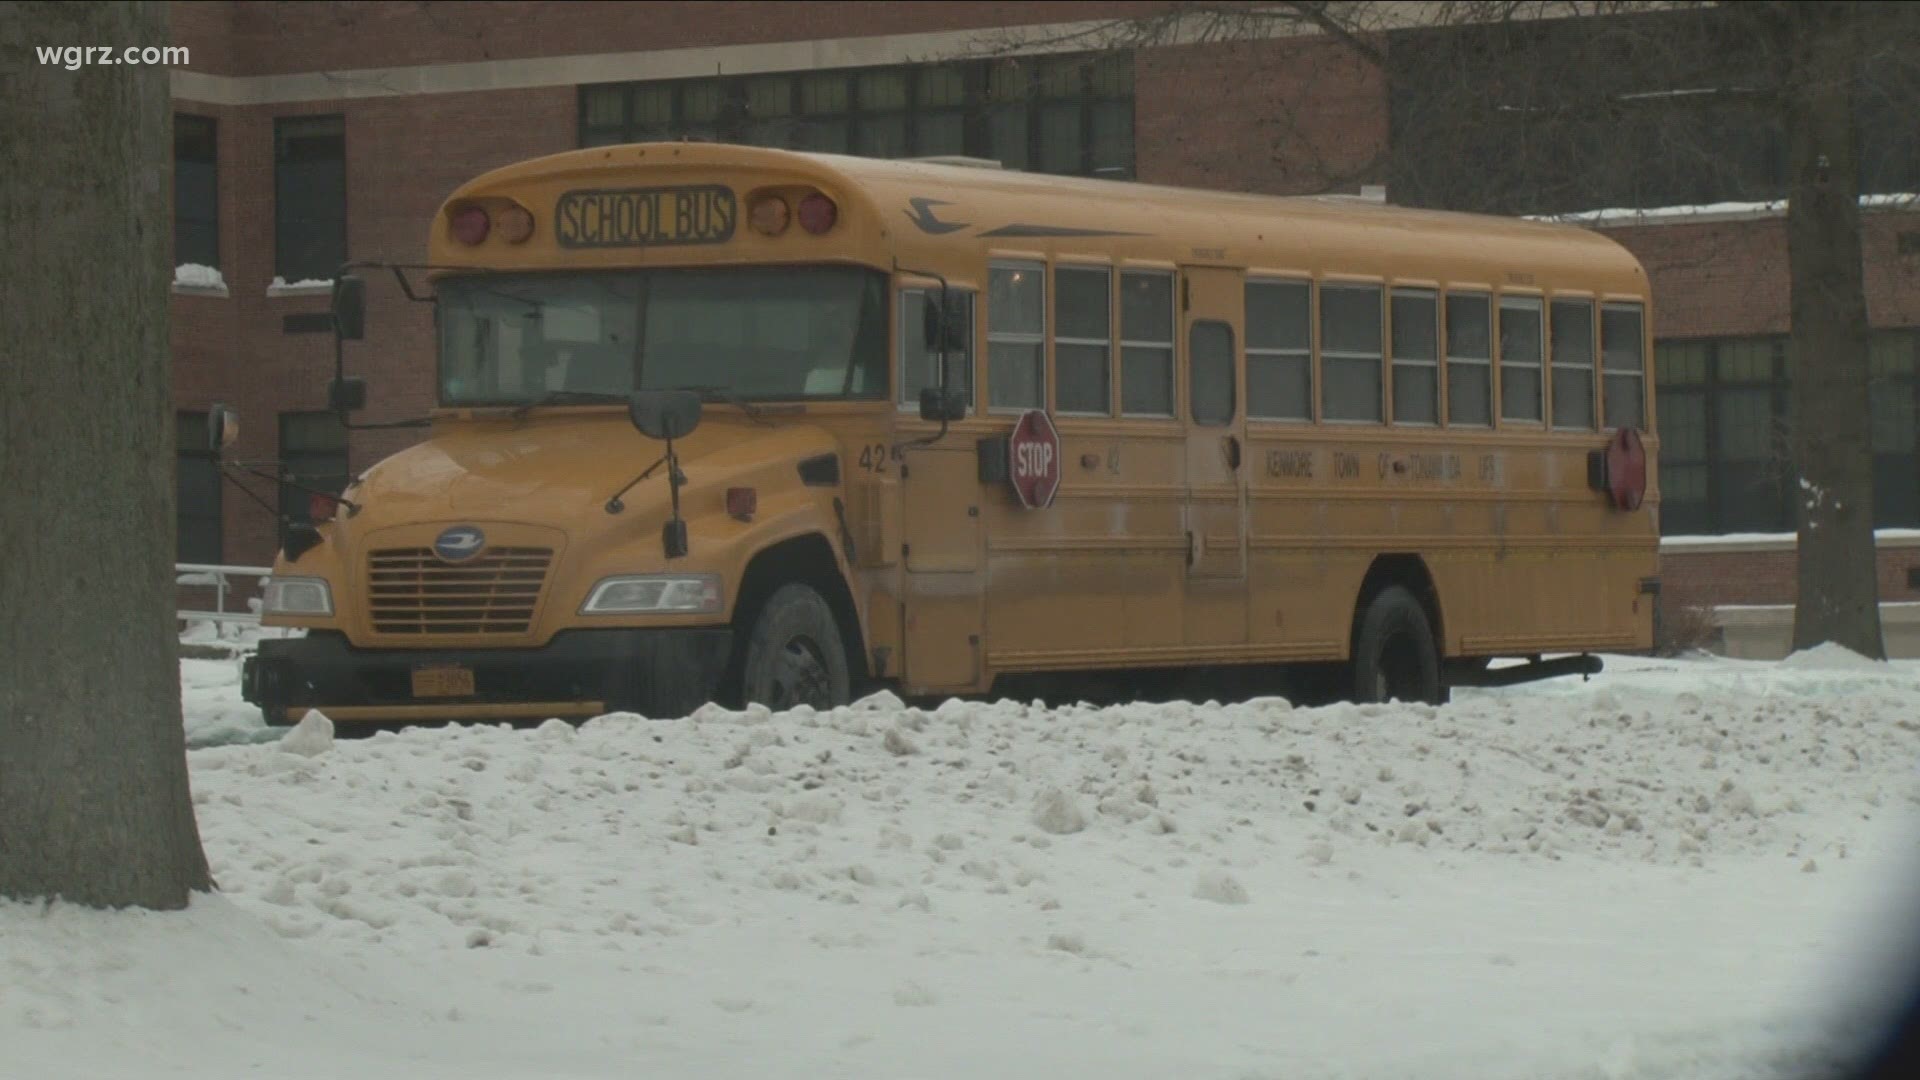 the state education department actually gave school districts some flexibility in this COVID complicated school year with a snow day pilot program -